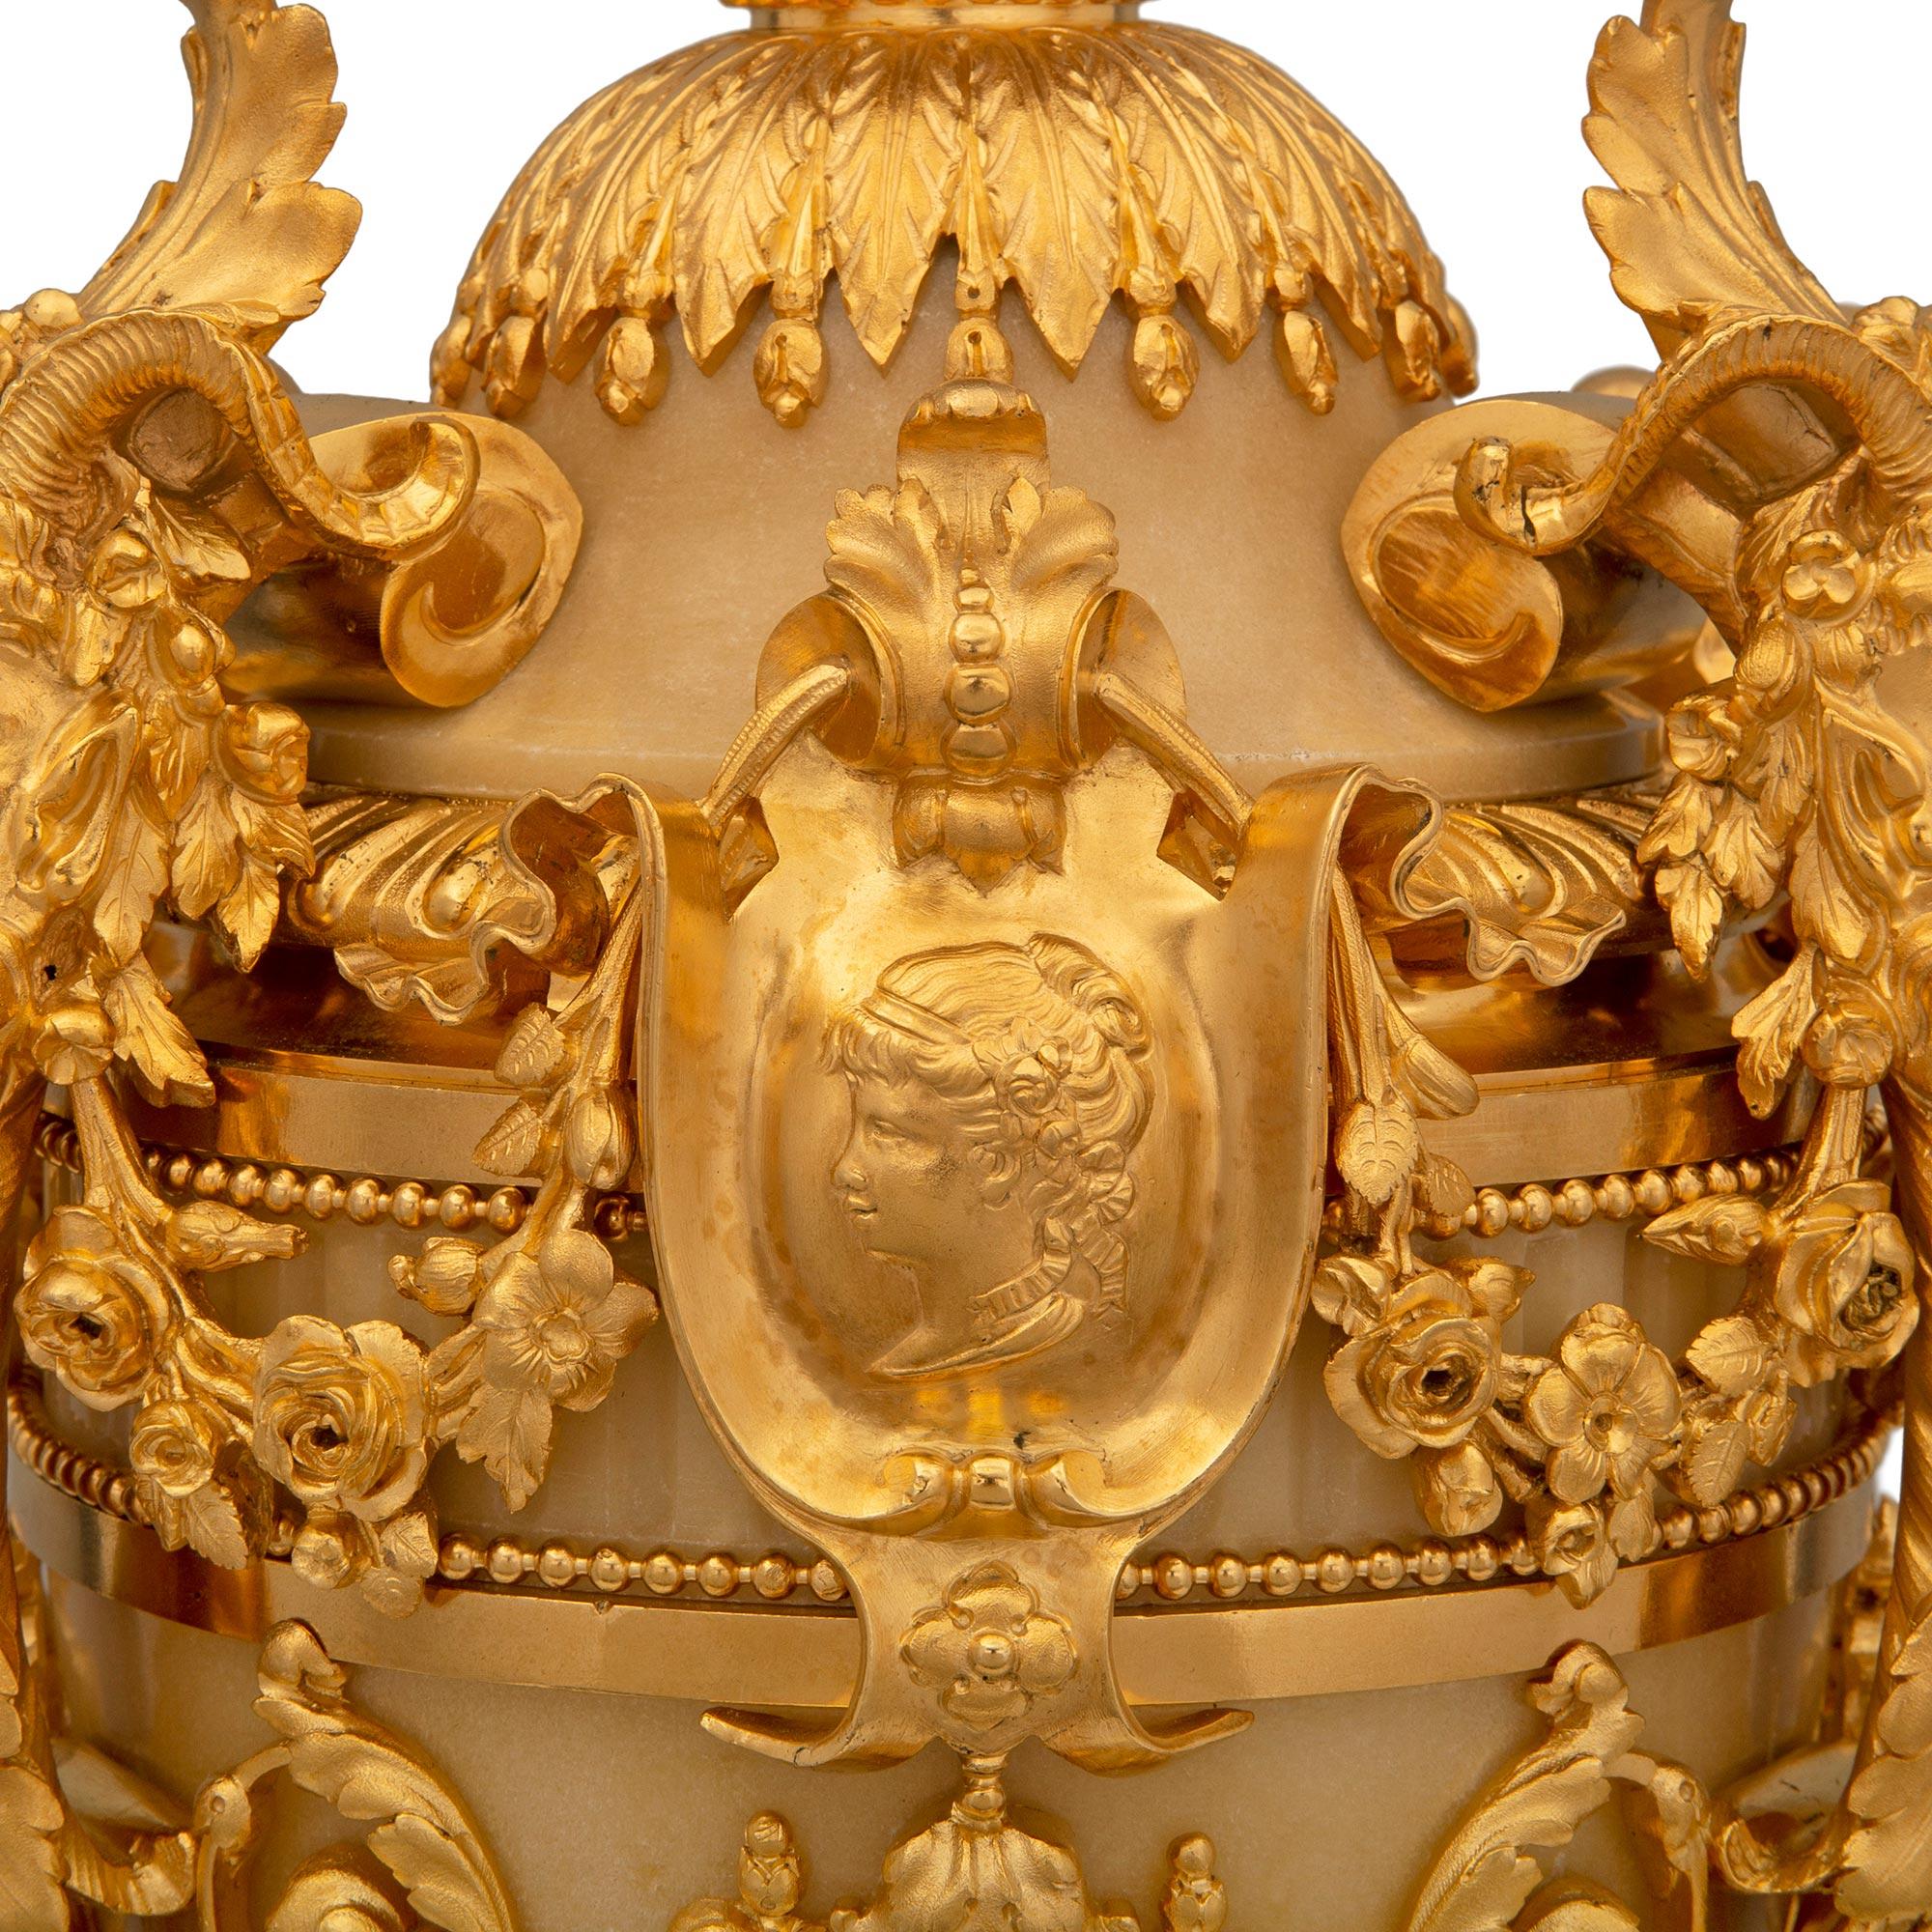 Pair of French 19th Century Belle Époque Period Alabaster and Ormolu Urns For Sale 2